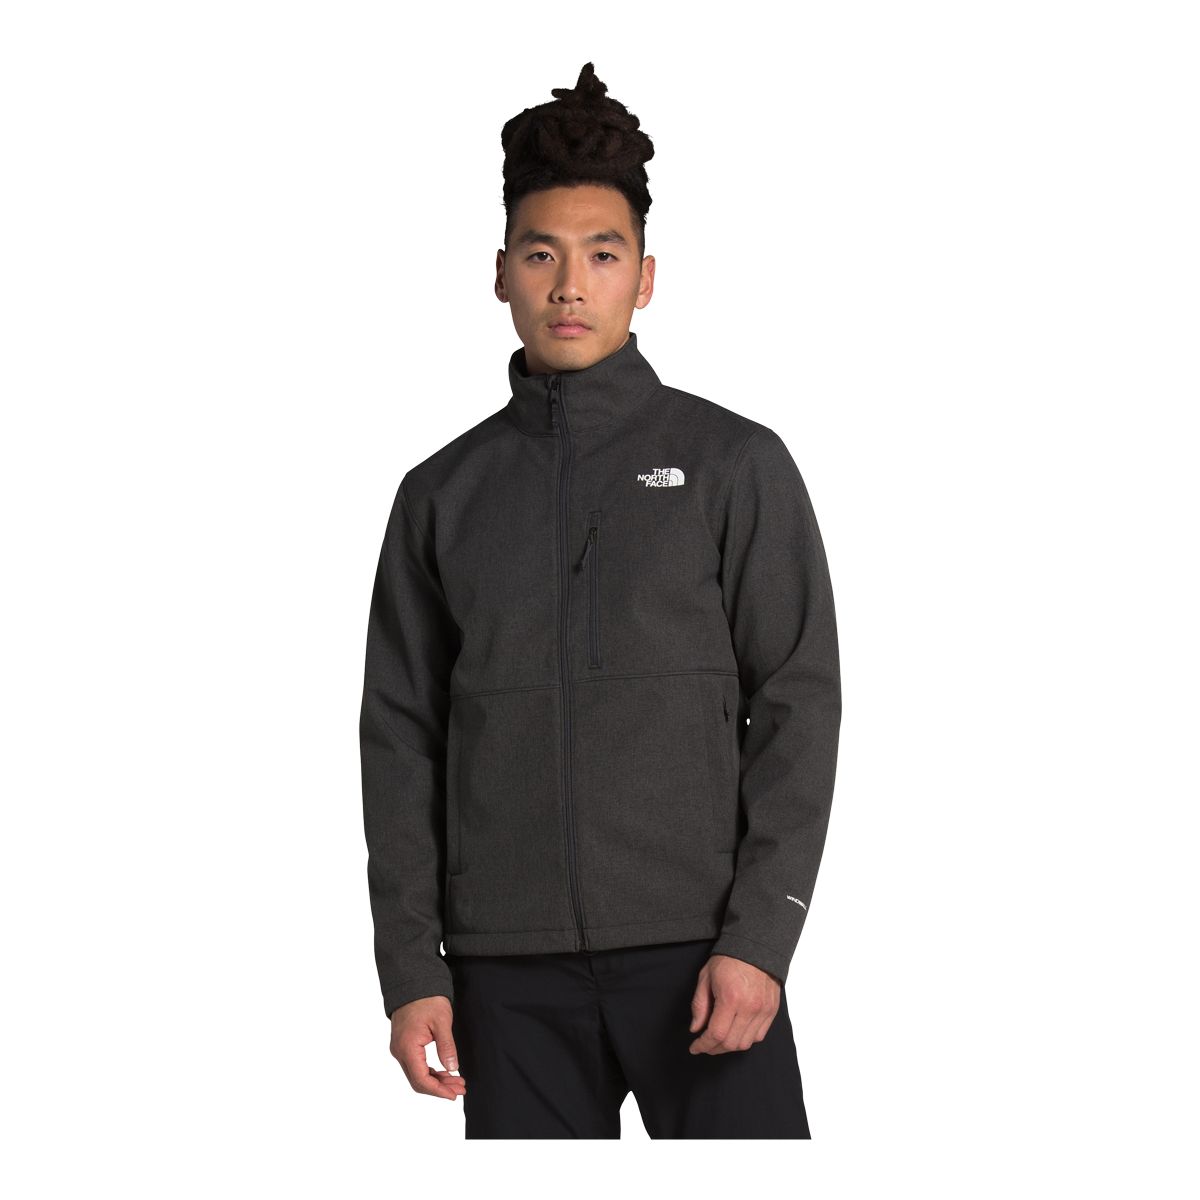 Image of The North Face Men's Apex Bionic Jacket